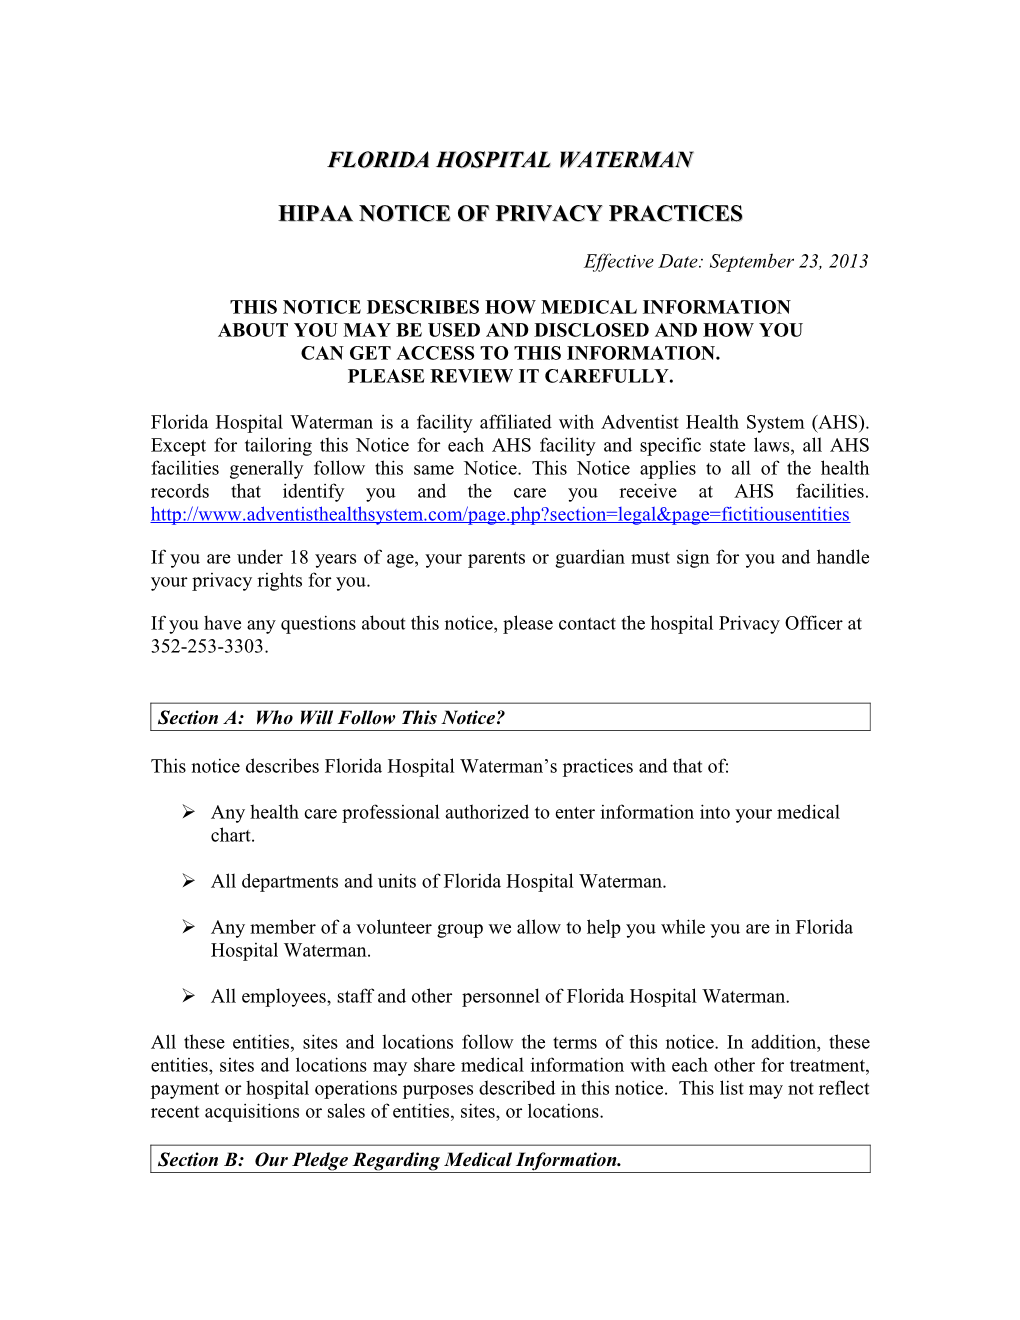 HIPAA Notice of Patient Privacy Practices